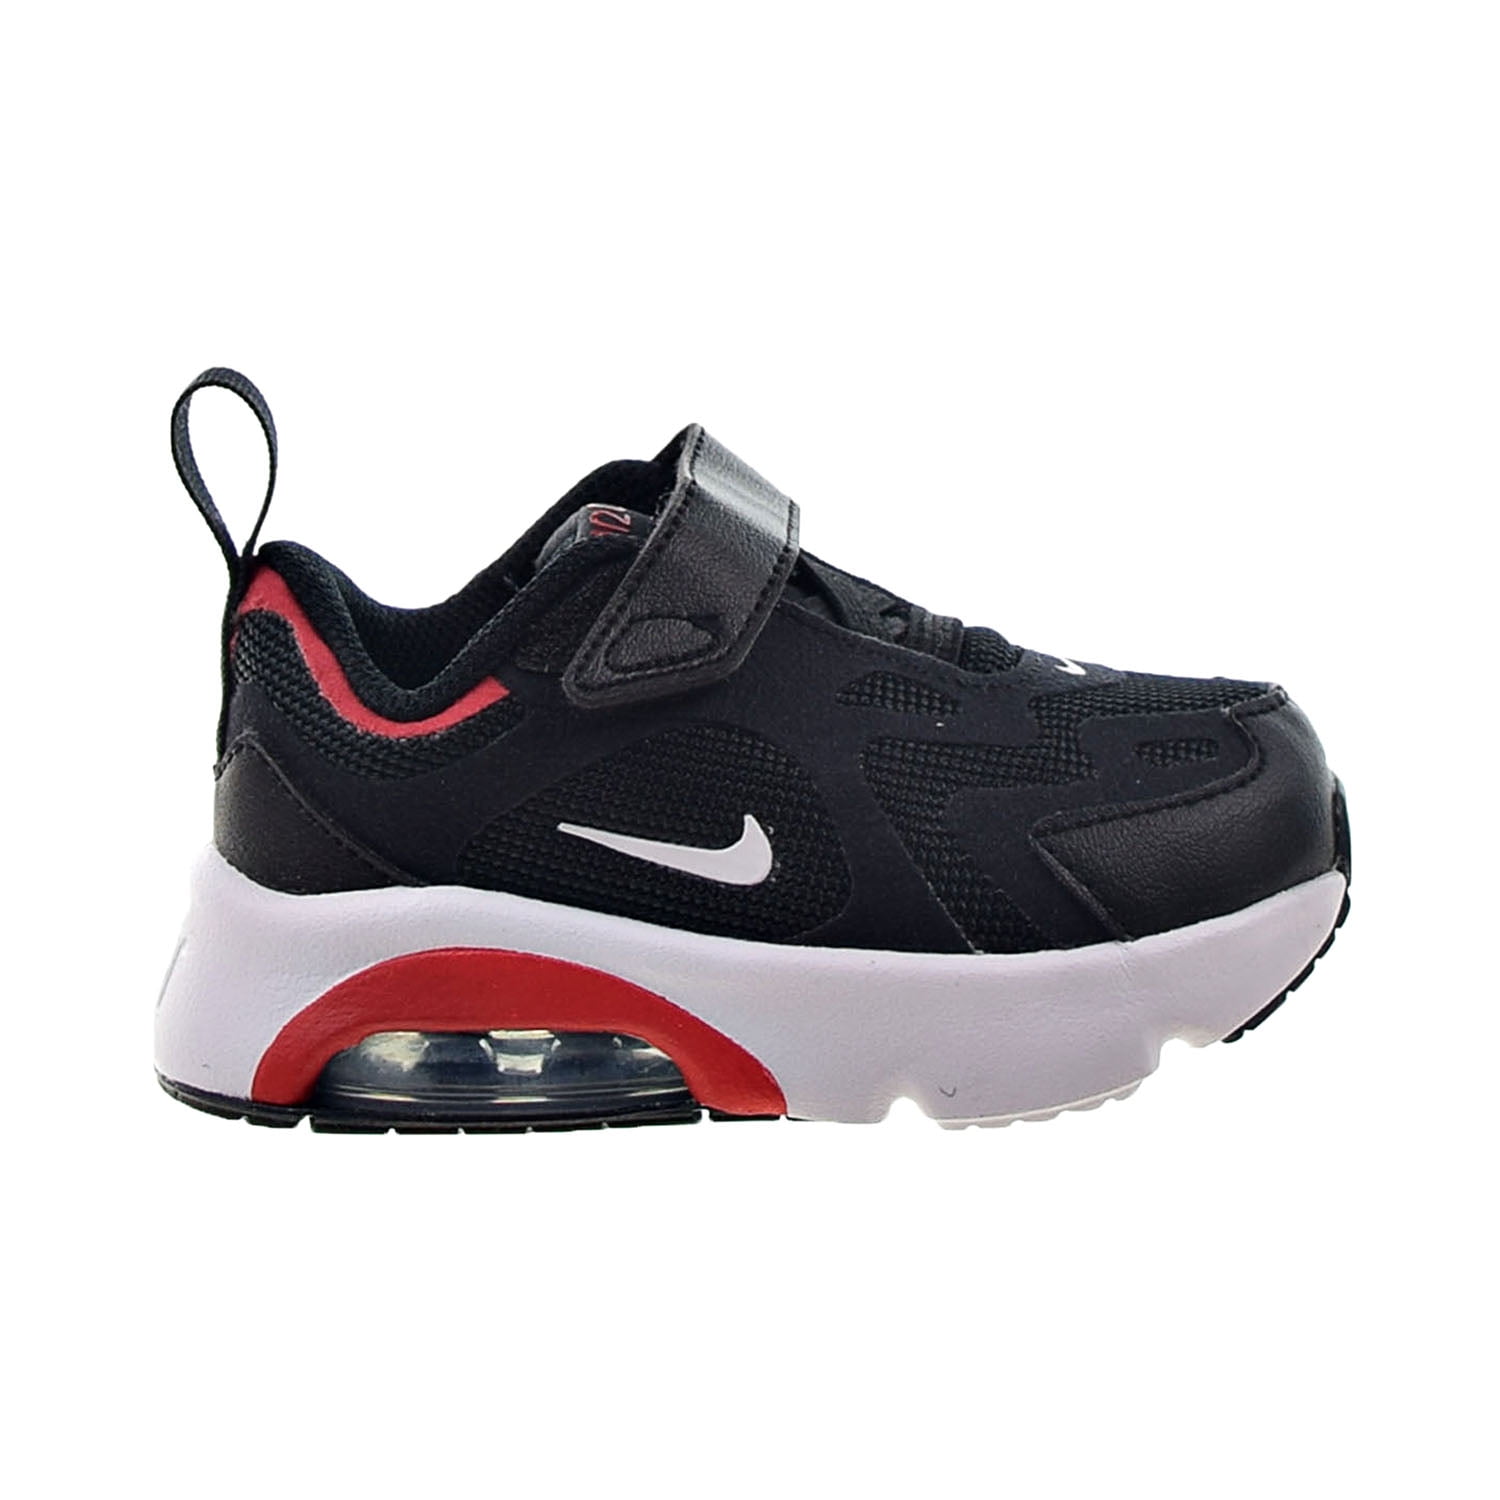 Nike Air Max 200 Toddlers' Shoes Black-White-University Red at5629-007